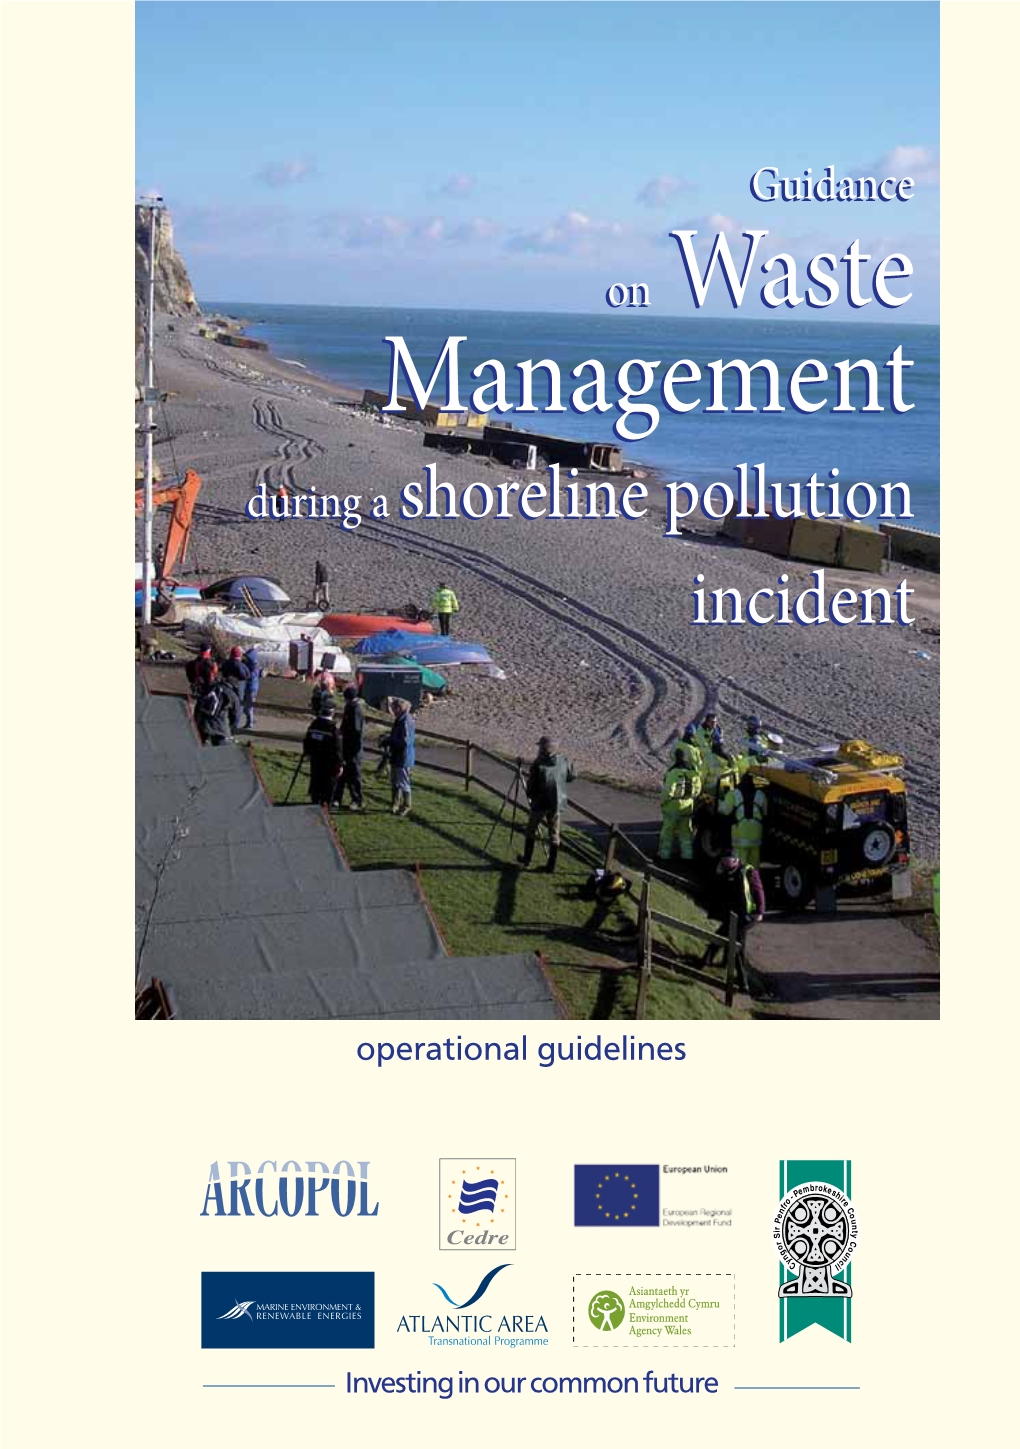 Guidance on Waste Management During a Shoreline Pollution Incident